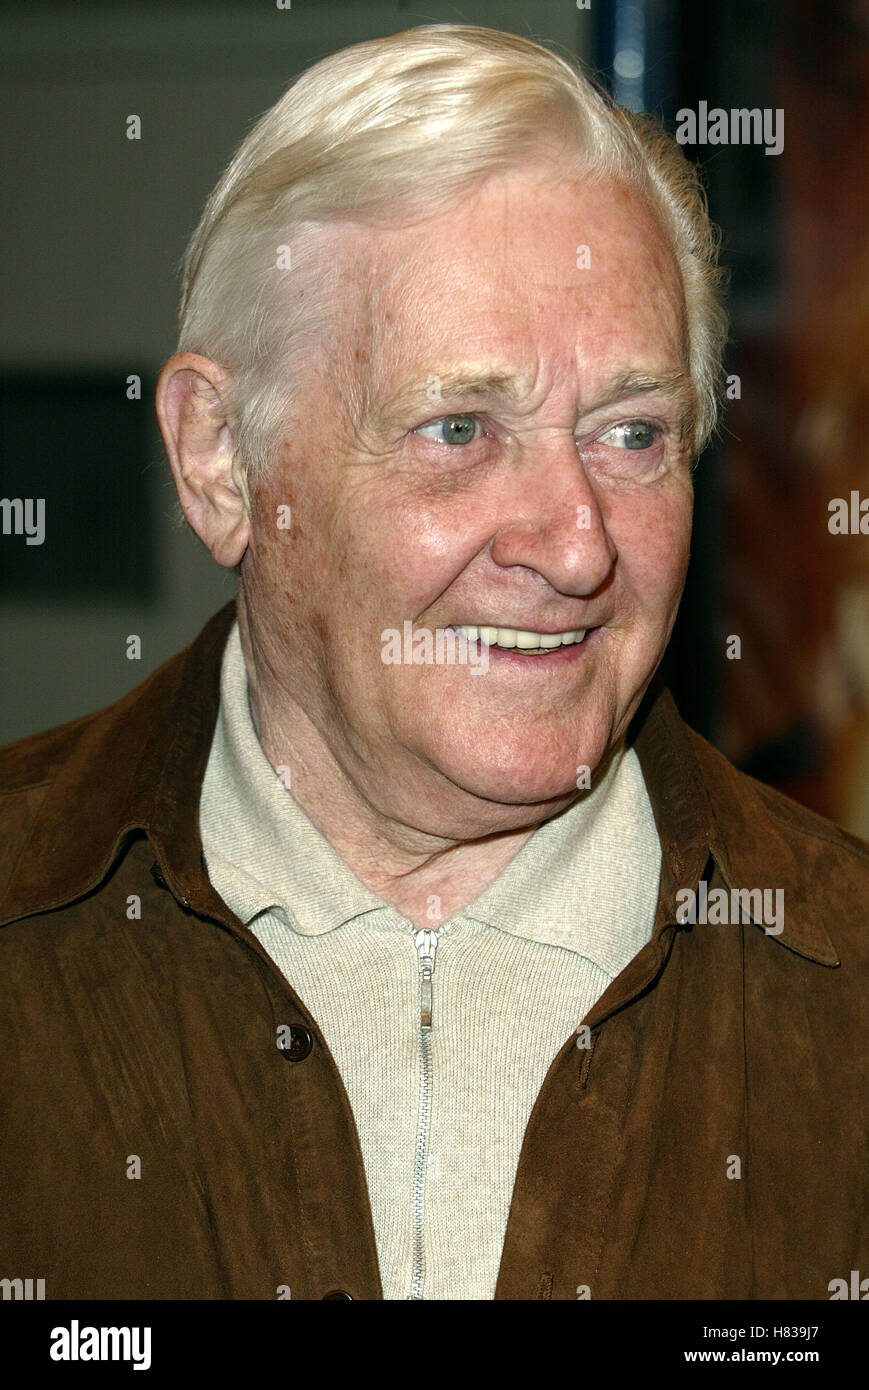 ALAN YOUNG. THE TIME MACHINE FILM PREMIERE WESTWOOD LOS ANGELES USA 04 March 2002 Stock Photo